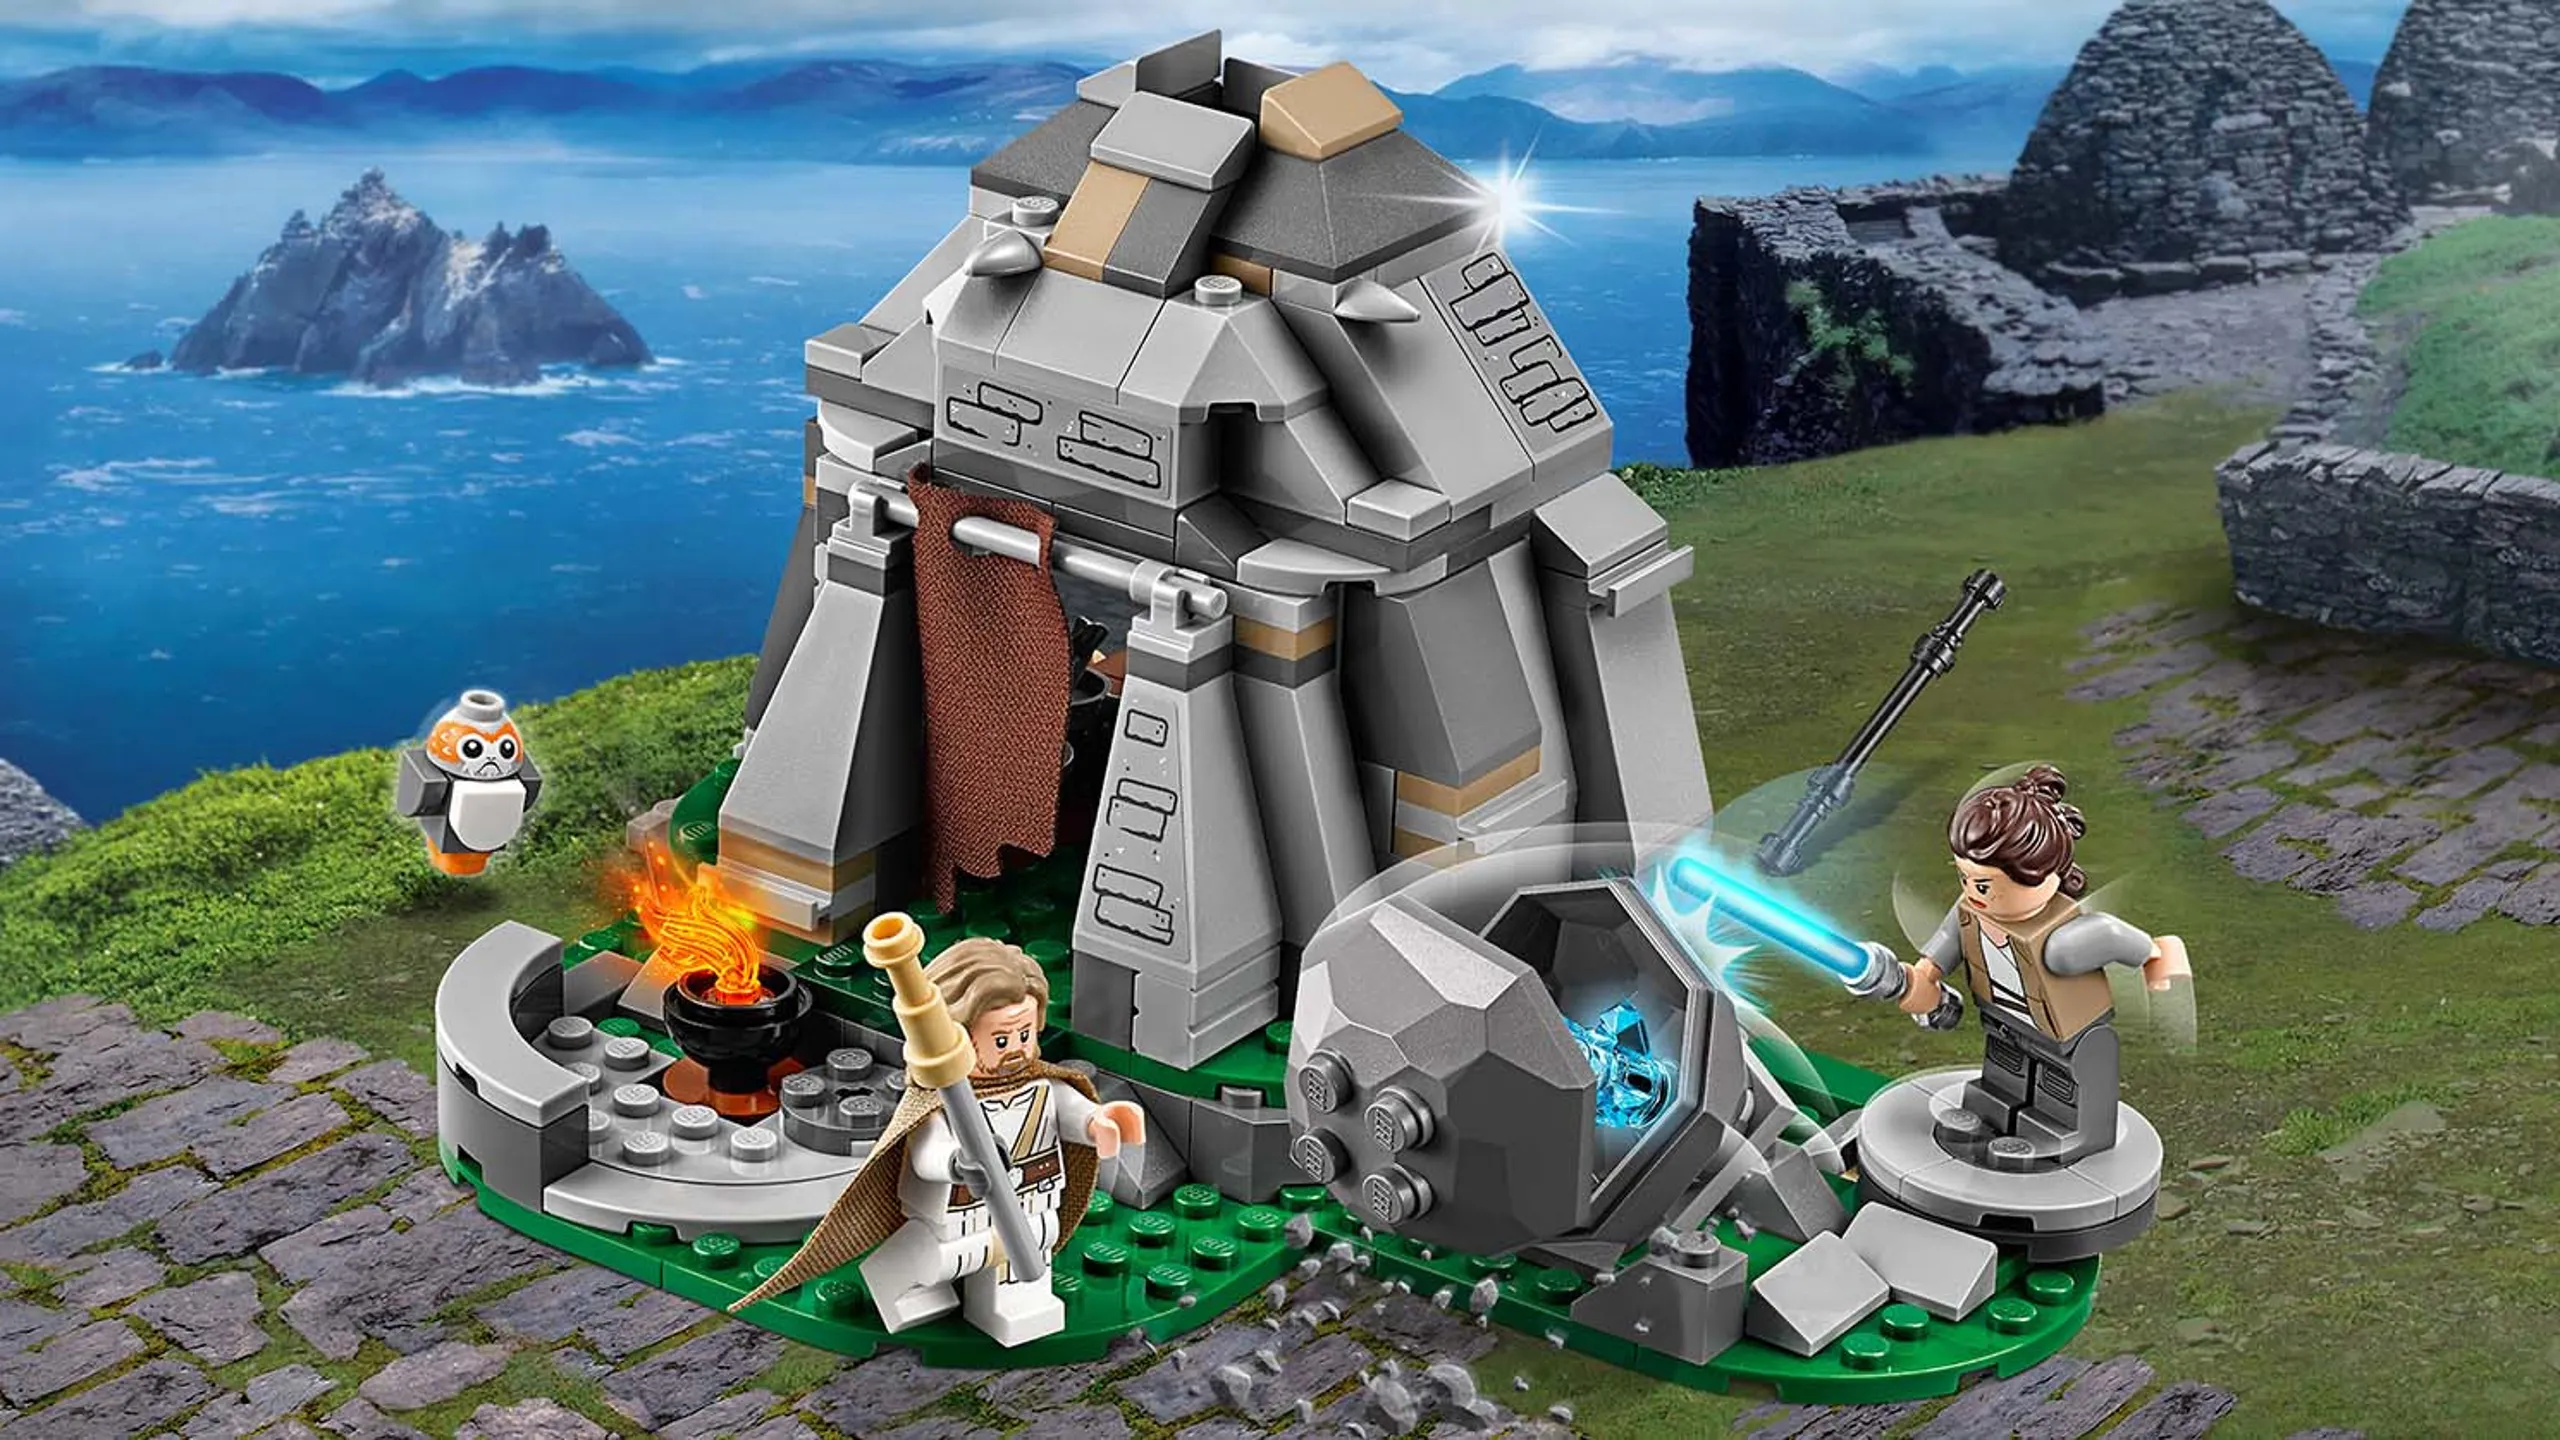 LEGO Star Wars Ahch-To Island™ Training - 75200 - Rey is training her Lightsaber skills at the Ahch-To Island.